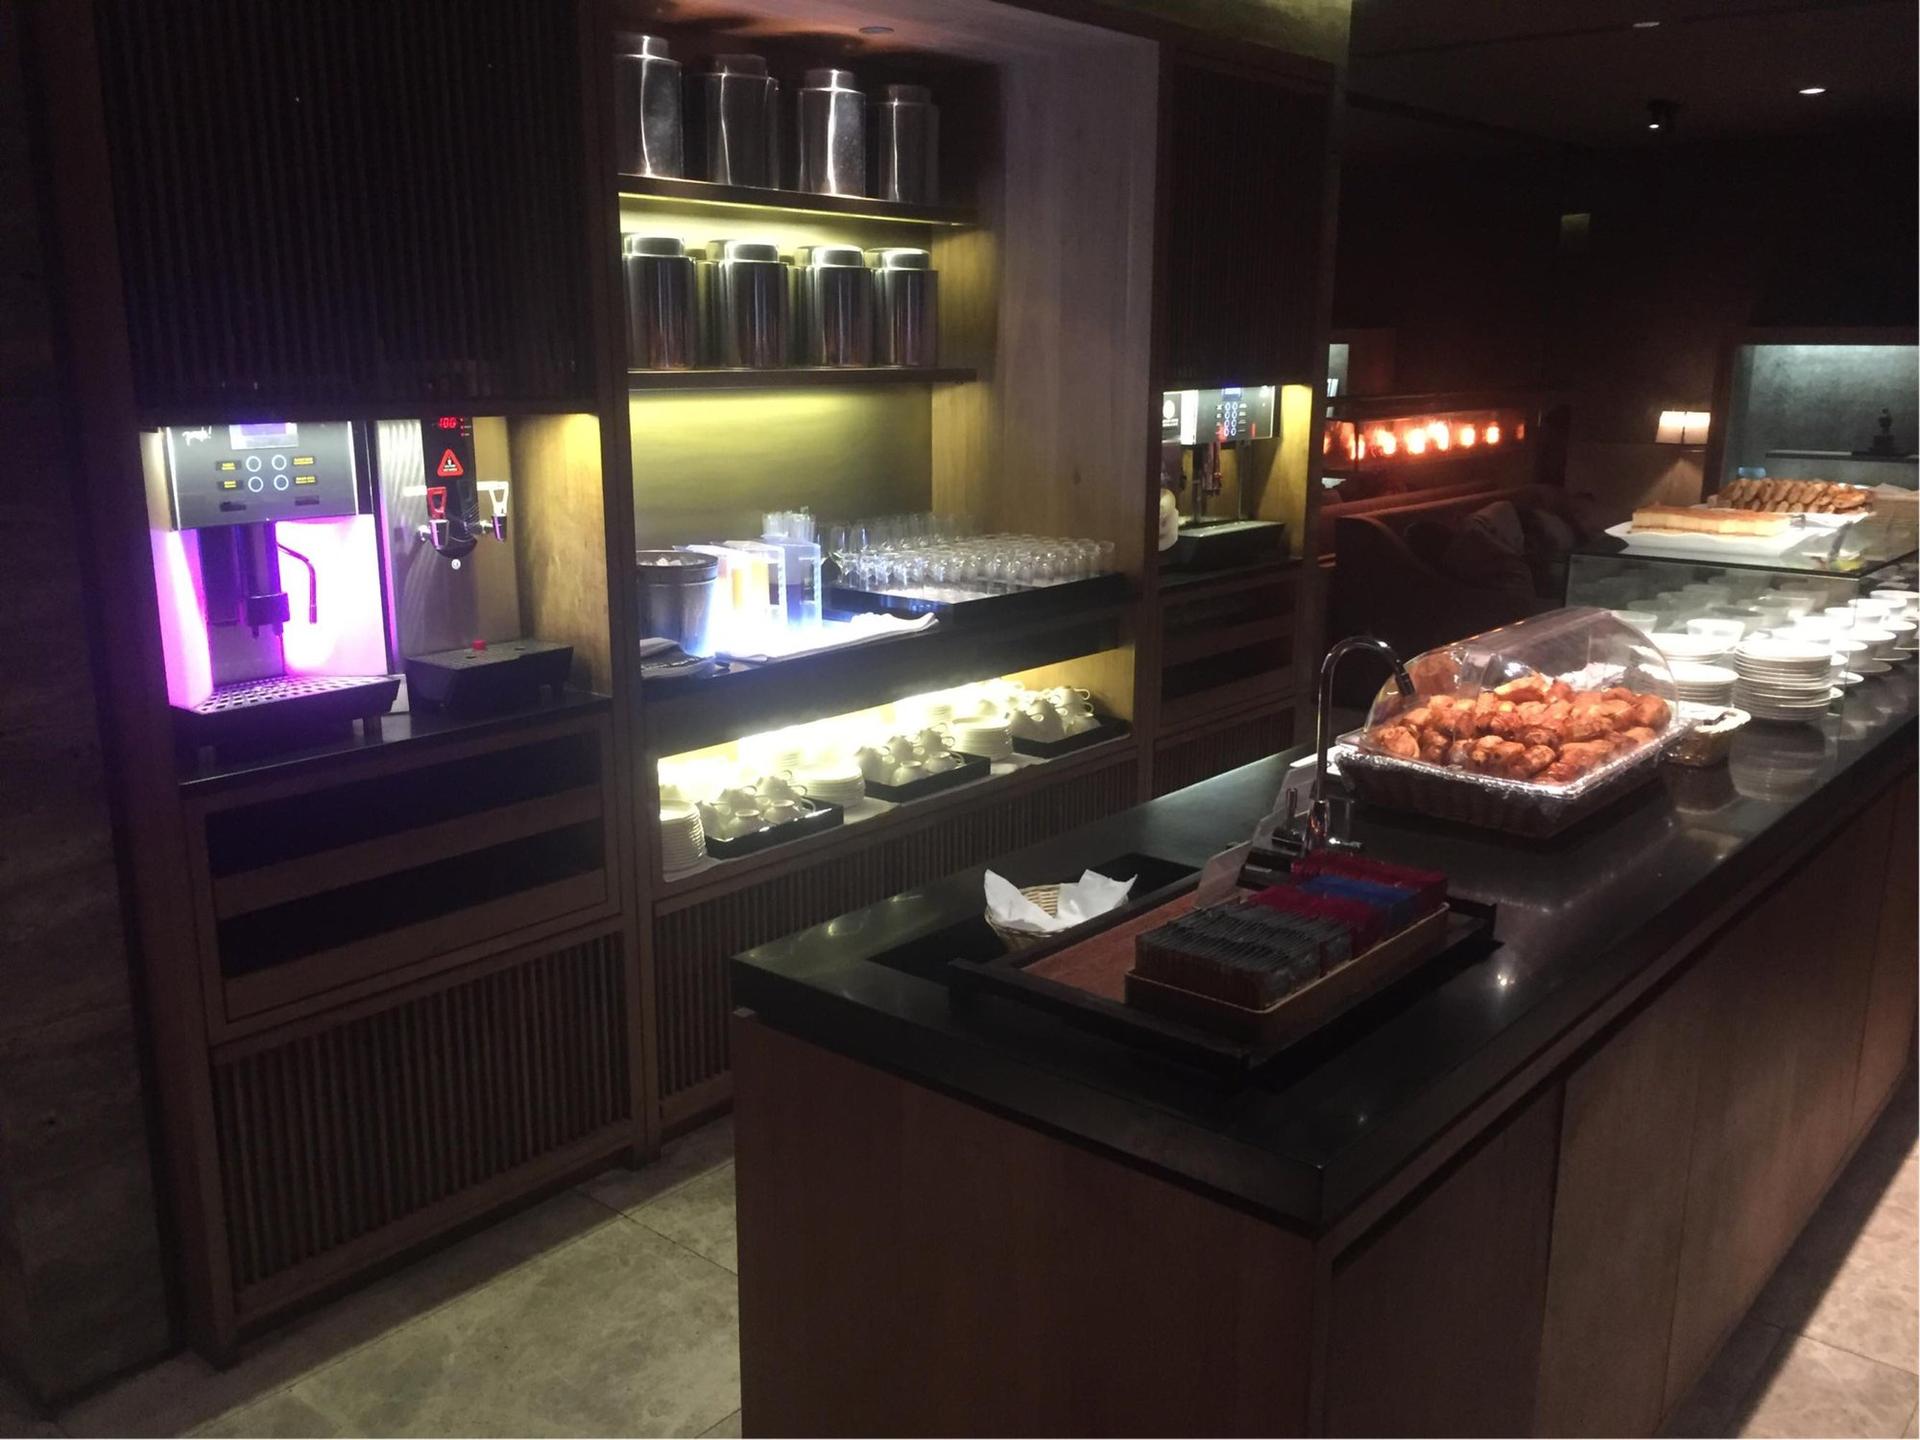 China Airlines Lounge (V1) image 9 of 44